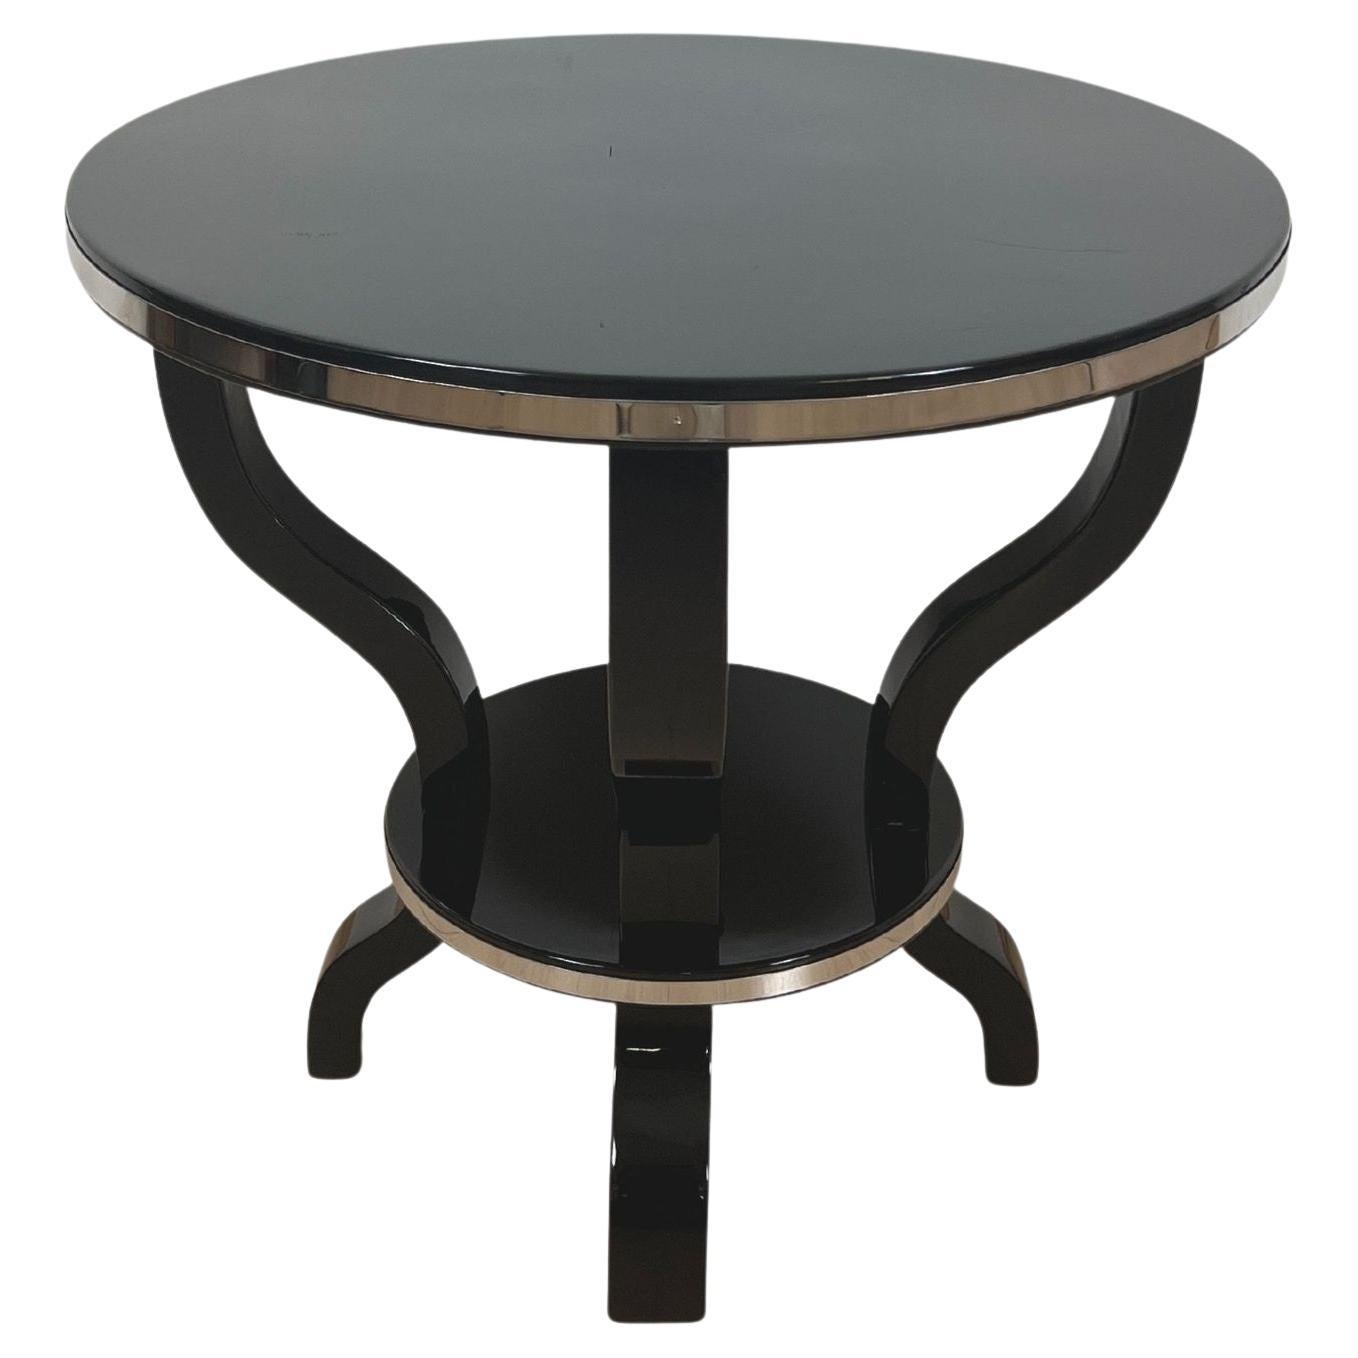 Art Deco Gueridon or Round Side Table, Black Lacquer, Metal, France circa 193